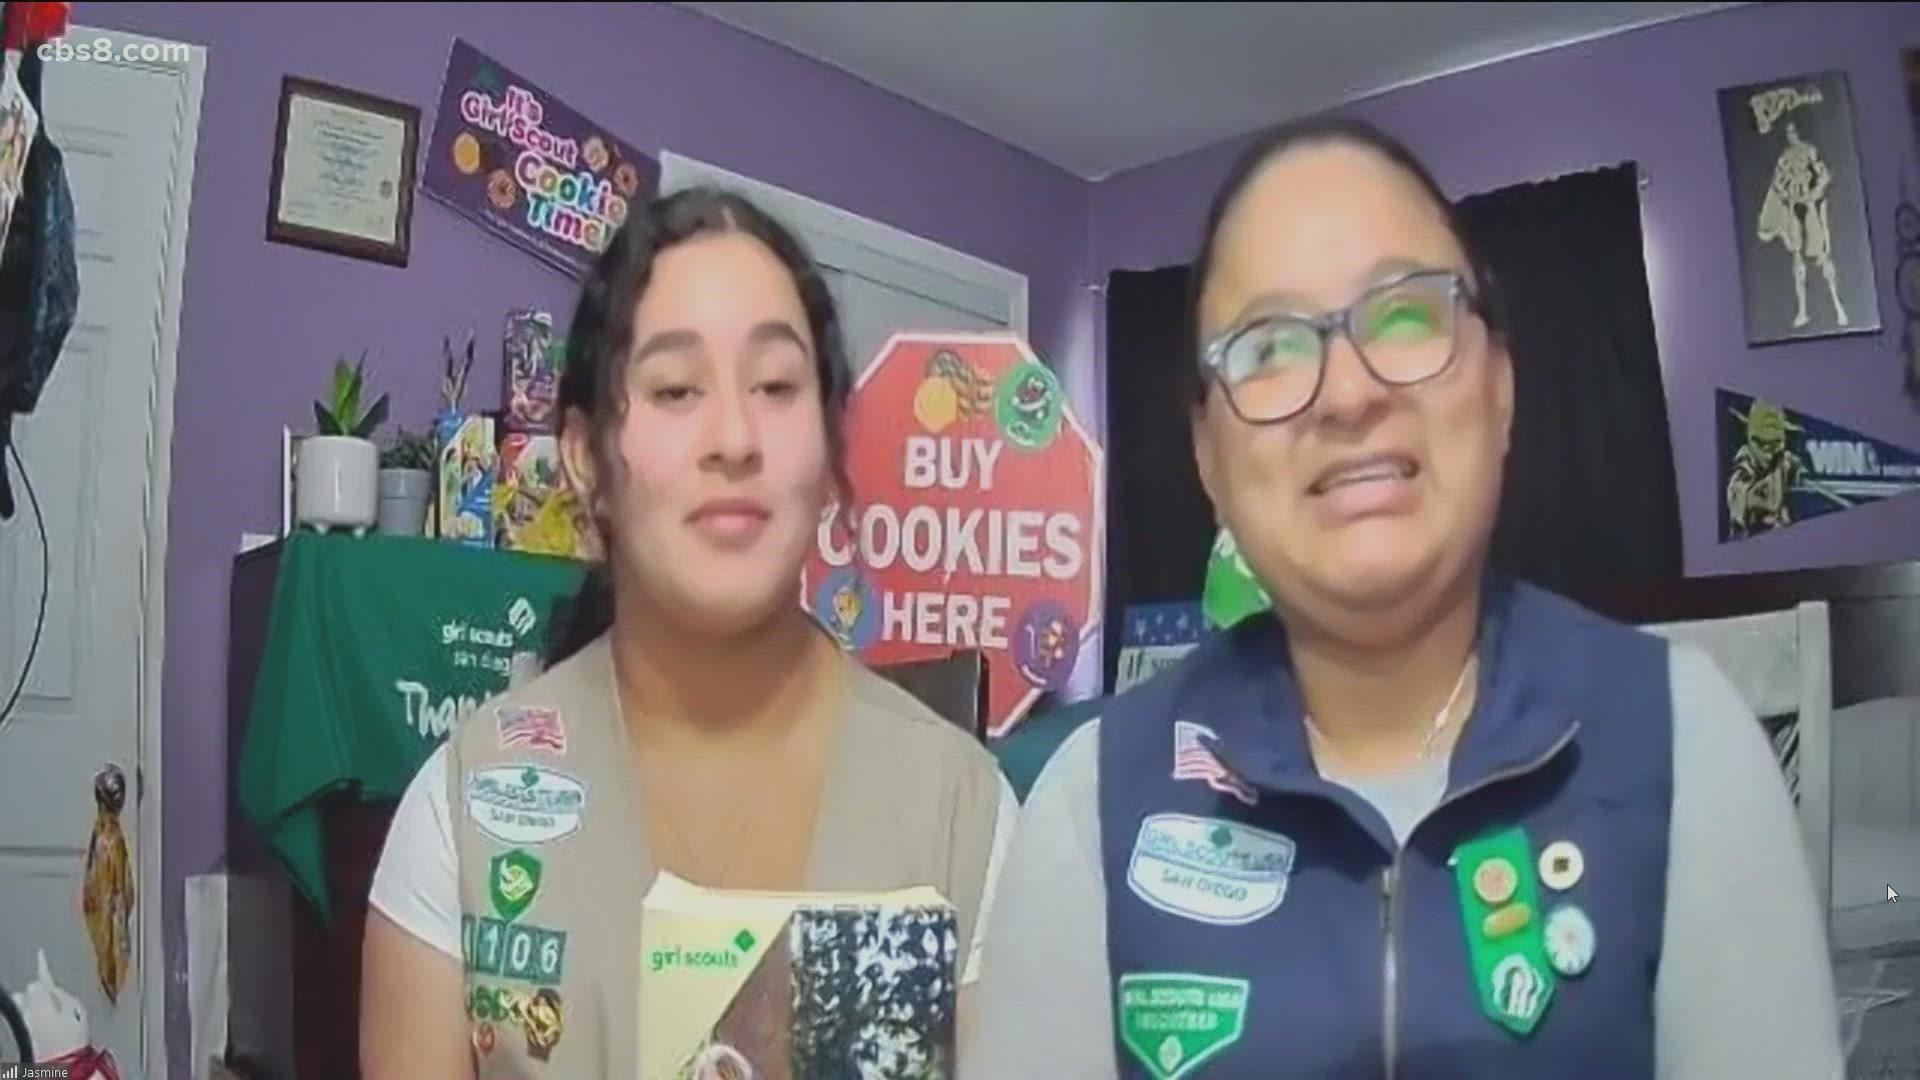 Troop Leader Maritza Gomez and Jasmine Araujo, Senior Girl Scout from Troop 4106 tell us about the new cookies.